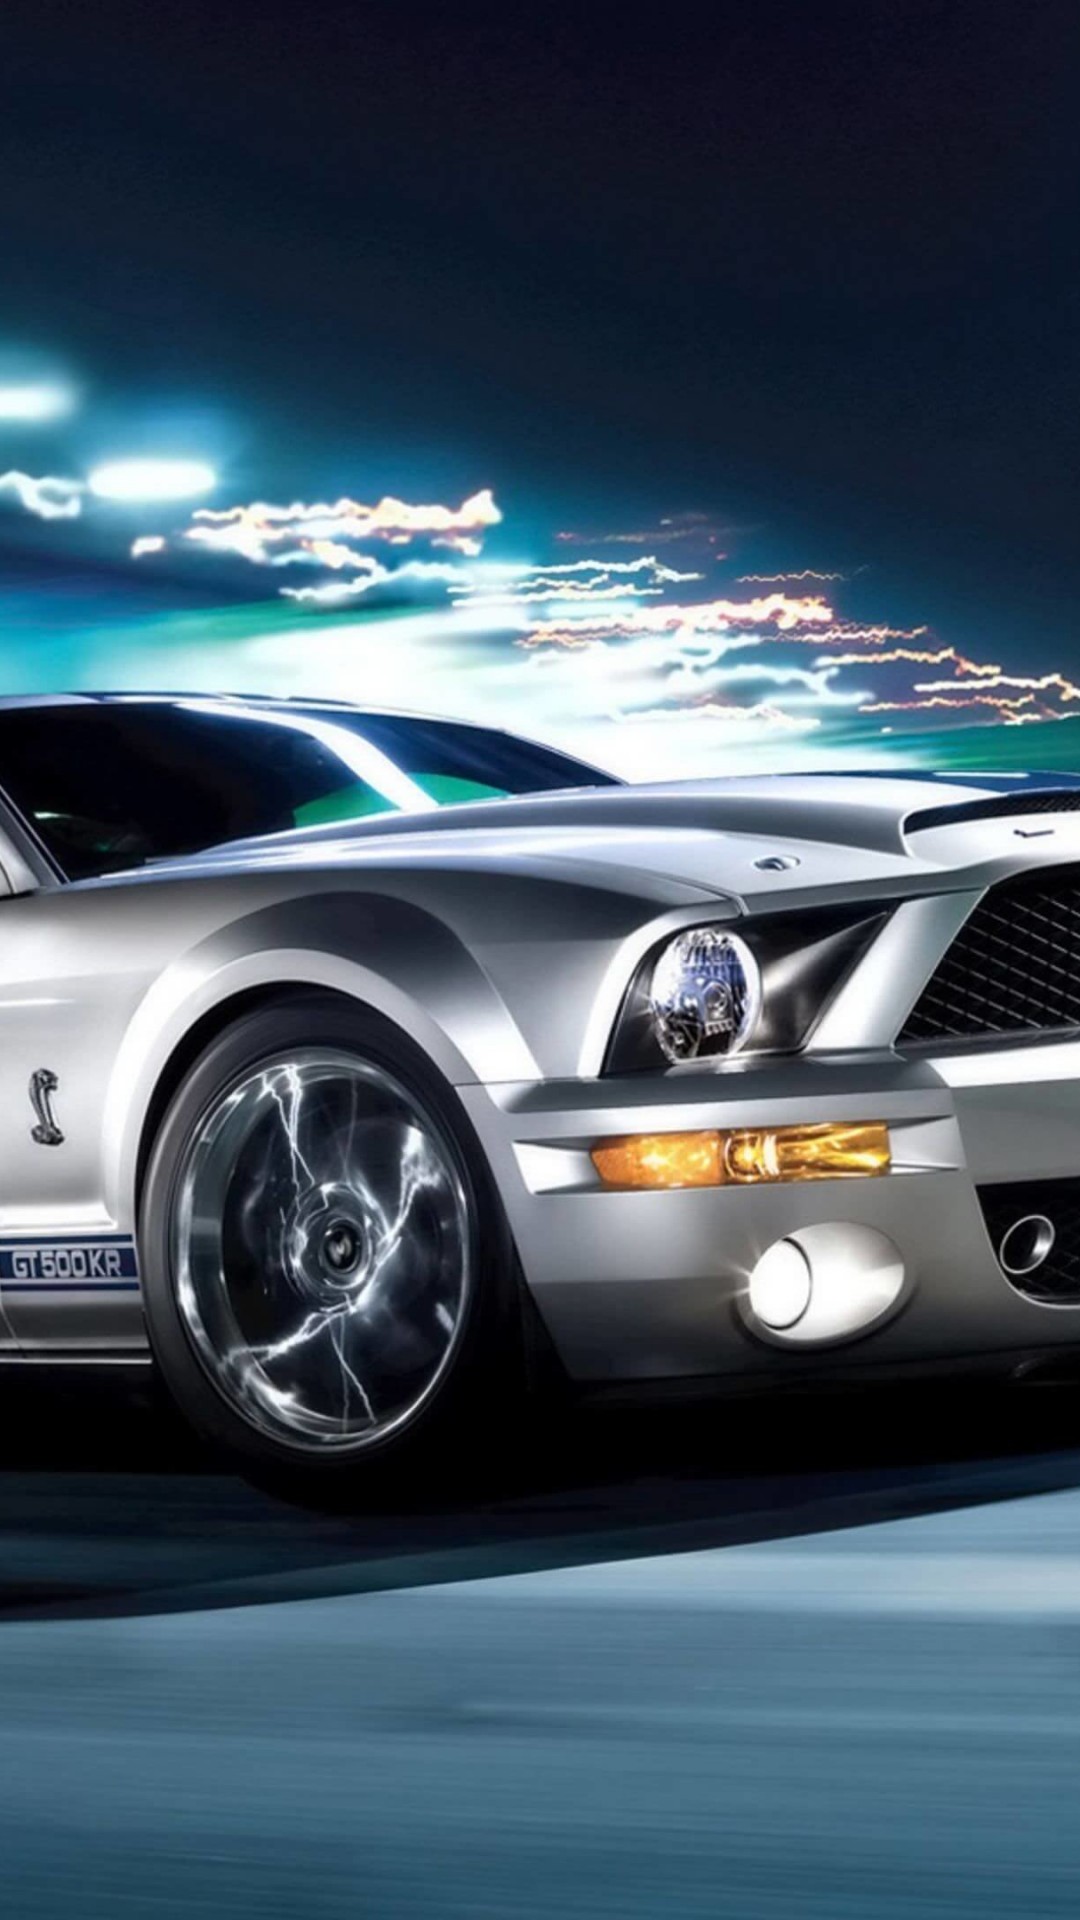 Ford Mustang Shelby GT500KR Wallpaper for SONY Xperia Z3